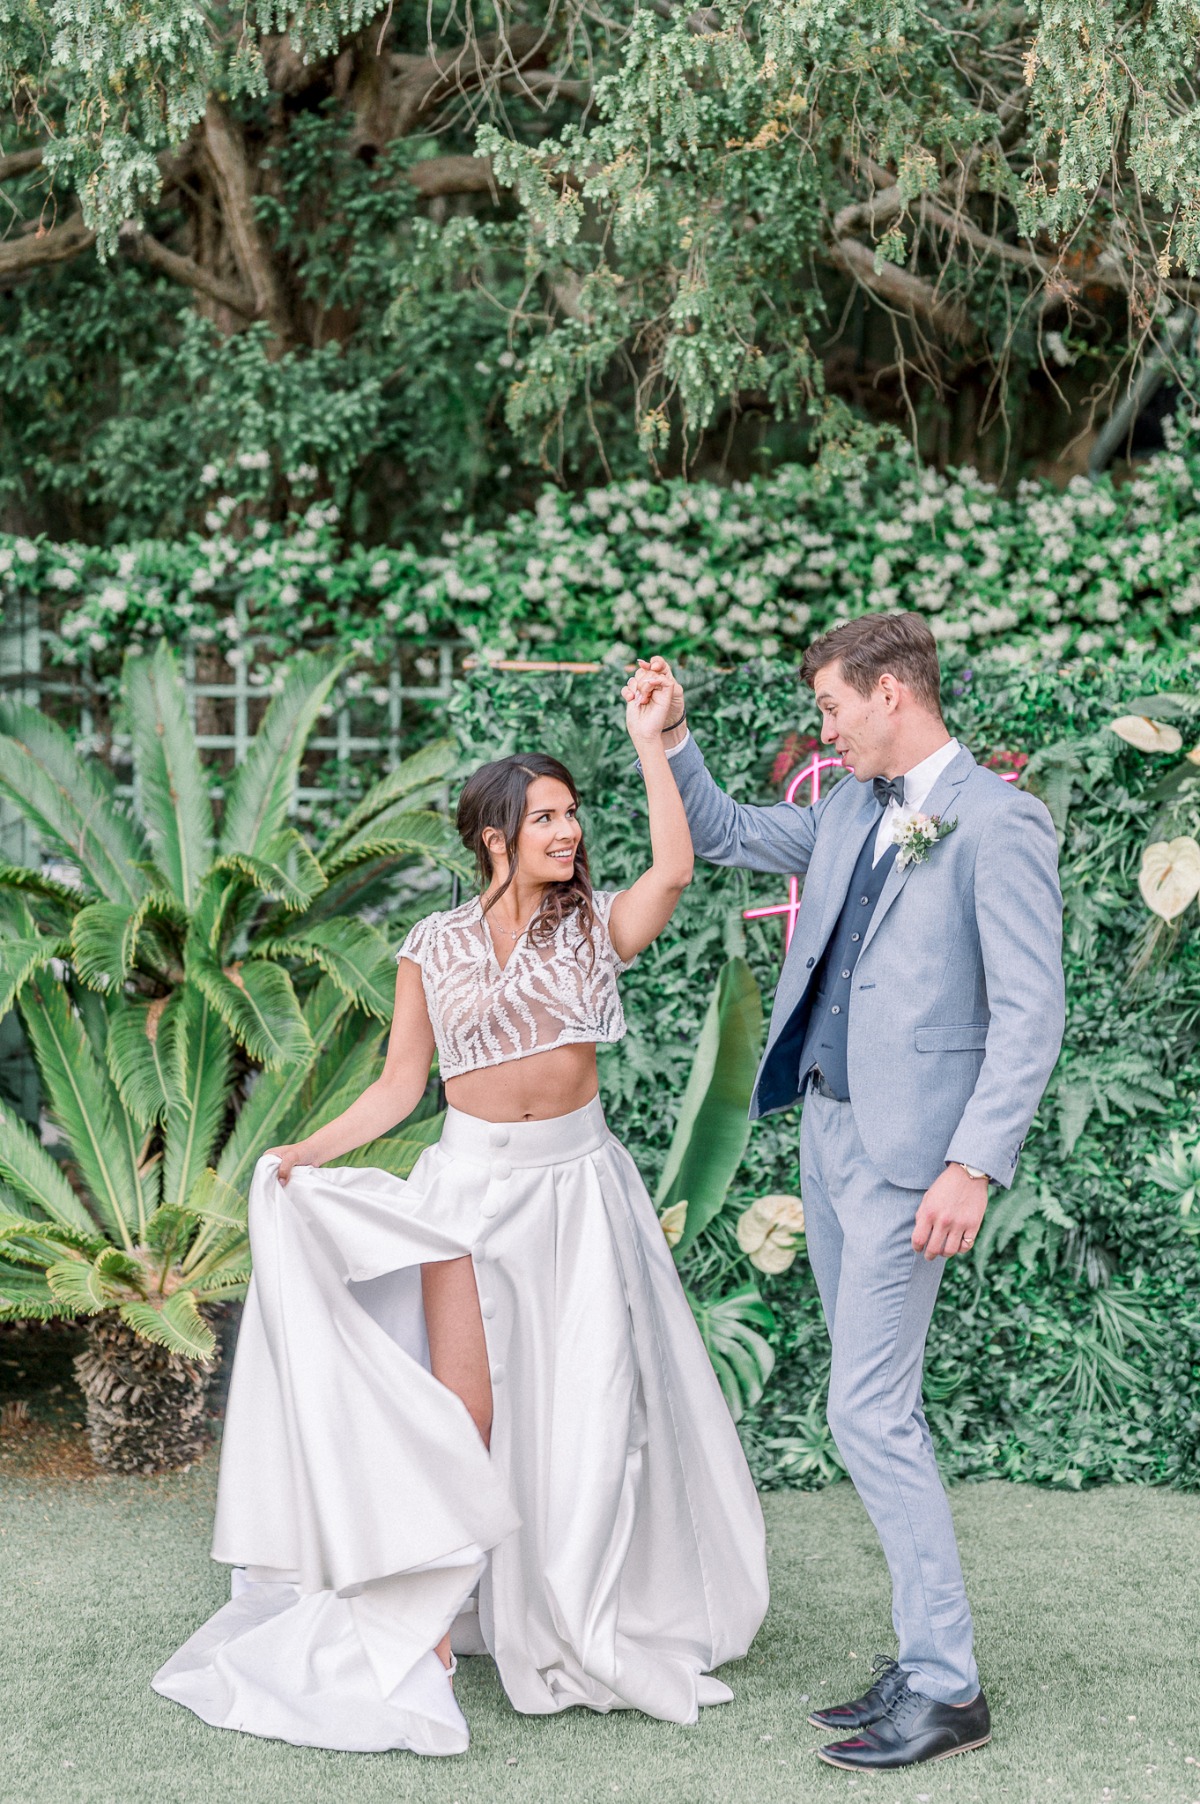 Groom spinning bride in front of tropical plants and neon sign